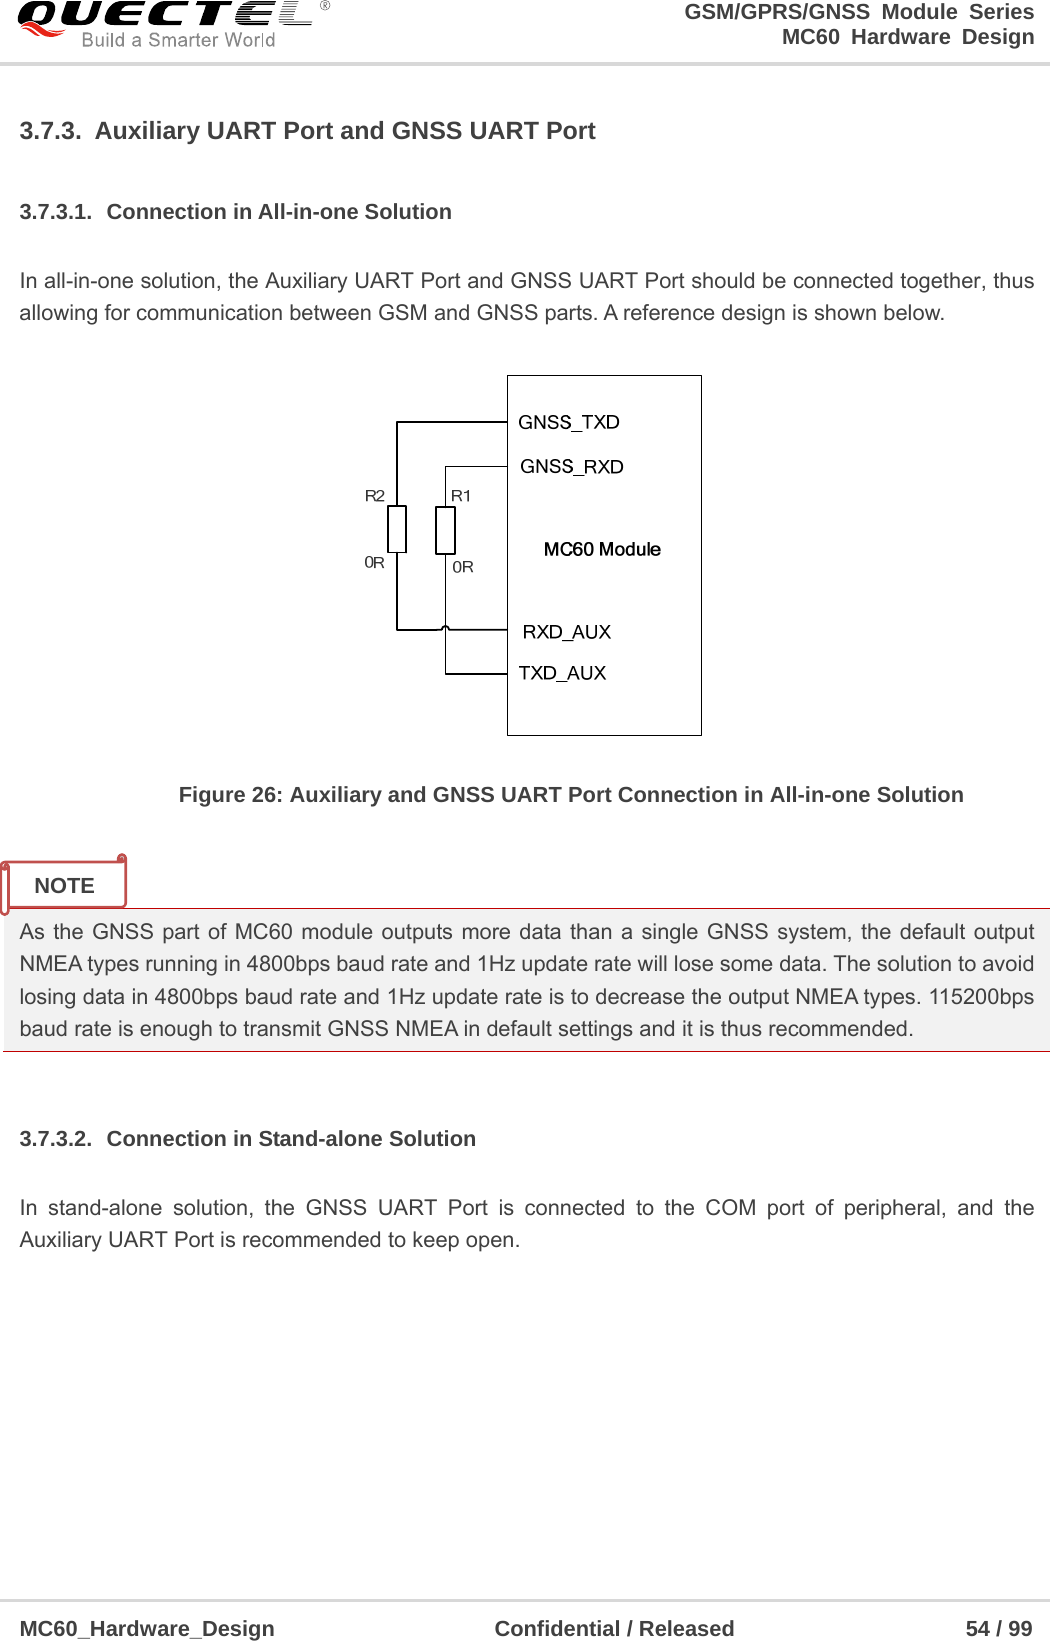                                                                     GSM/GPRS/GNSS Module Series                                                                 MC60 Hardware Design  MC60_Hardware_Design                    Confidential / Released                     54 / 99     3.7.3.  Auxiliary UART Port and GNSS UART Port 3.7.3.1.  Connection in All-in-one Solution In all-in-one solution, the Auxiliary UART Port and GNSS UART Port should be connected together, thus allowing for communication between GSM and GNSS parts. A reference design is shown below.    Figure 26: Auxiliary and GNSS UART Port Connection in All-in-one Solution   As the GNSS part of MC60 module outputs more data than a single GNSS system, the default output NMEA types running in 4800bps baud rate and 1Hz update rate will lose some data. The solution to avoid losing data in 4800bps baud rate and 1Hz update rate is to decrease the output NMEA types. 115200bps baud rate is enough to transmit GNSS NMEA in default settings and it is thus recommended.  3.7.3.2.  Connection in Stand-alone Solution In stand-alone solution, the GNSS UART Port is connected to the COM port of peripheral, and the Auxiliary UART Port is recommended to keep open. NOTE 